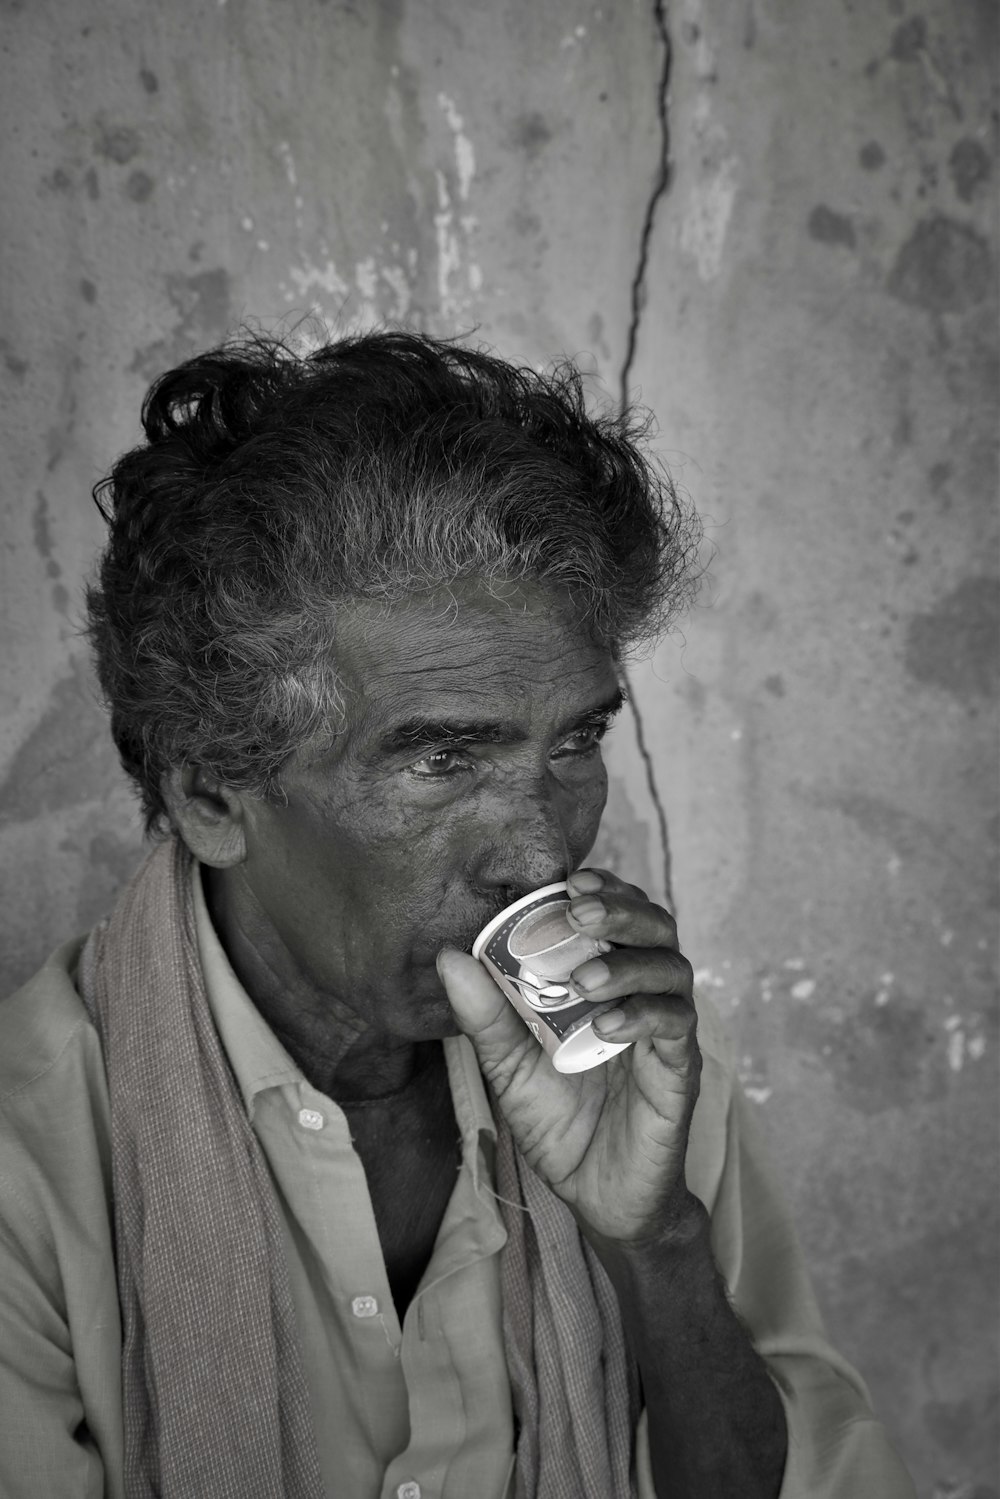 a black and white photo of a man drinking something